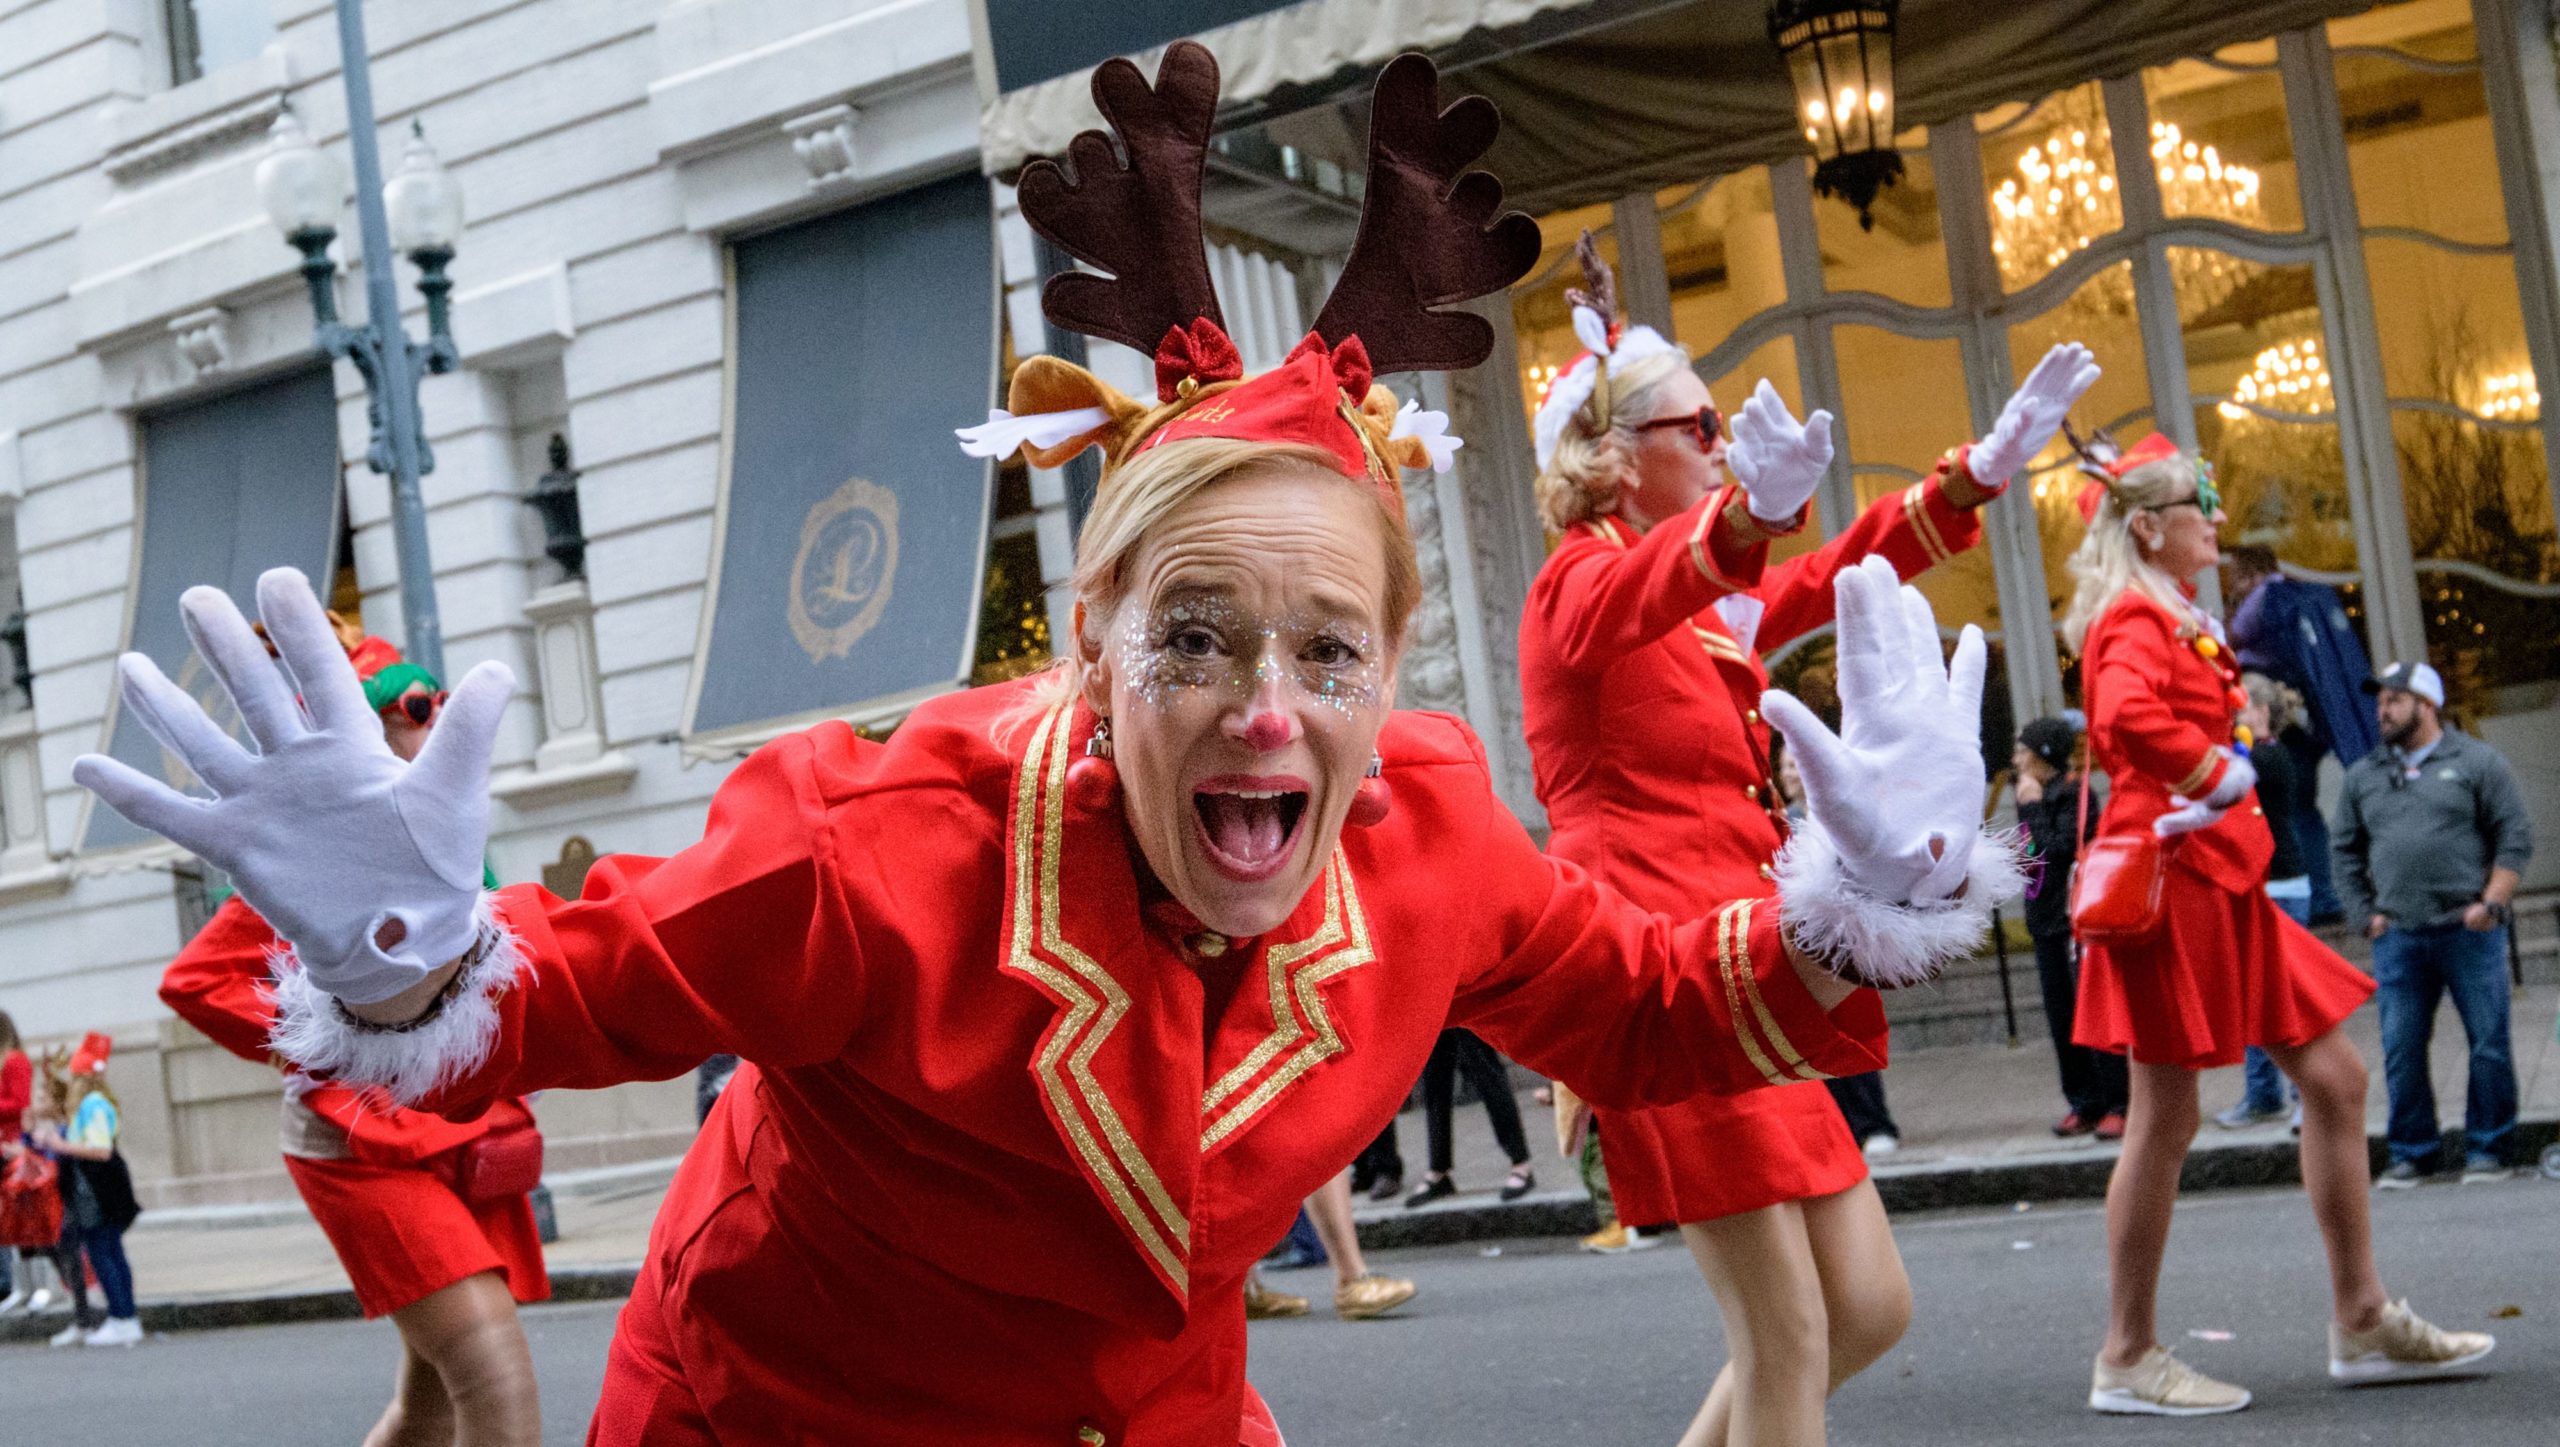 The annual holiday-themed Krewe of Jingle rolls in the Central Business District and Warehouse District in New Orleans December 7, 2019. The event is presented by Downtown Development District and the Roosevelt Hotel New Orleans. Krewes included the Sirens of New Orleans, the Muff-a-Lottas, the Pussy Footers, the Organ Grinders, the Amelia EarHawts &amp; Cabin Krewe, and the Rolling Elvi. Guest riders included Mr. Bingle with news anchor John Snell and photojournalist Lance Washington. Photo by Matthew Hinton